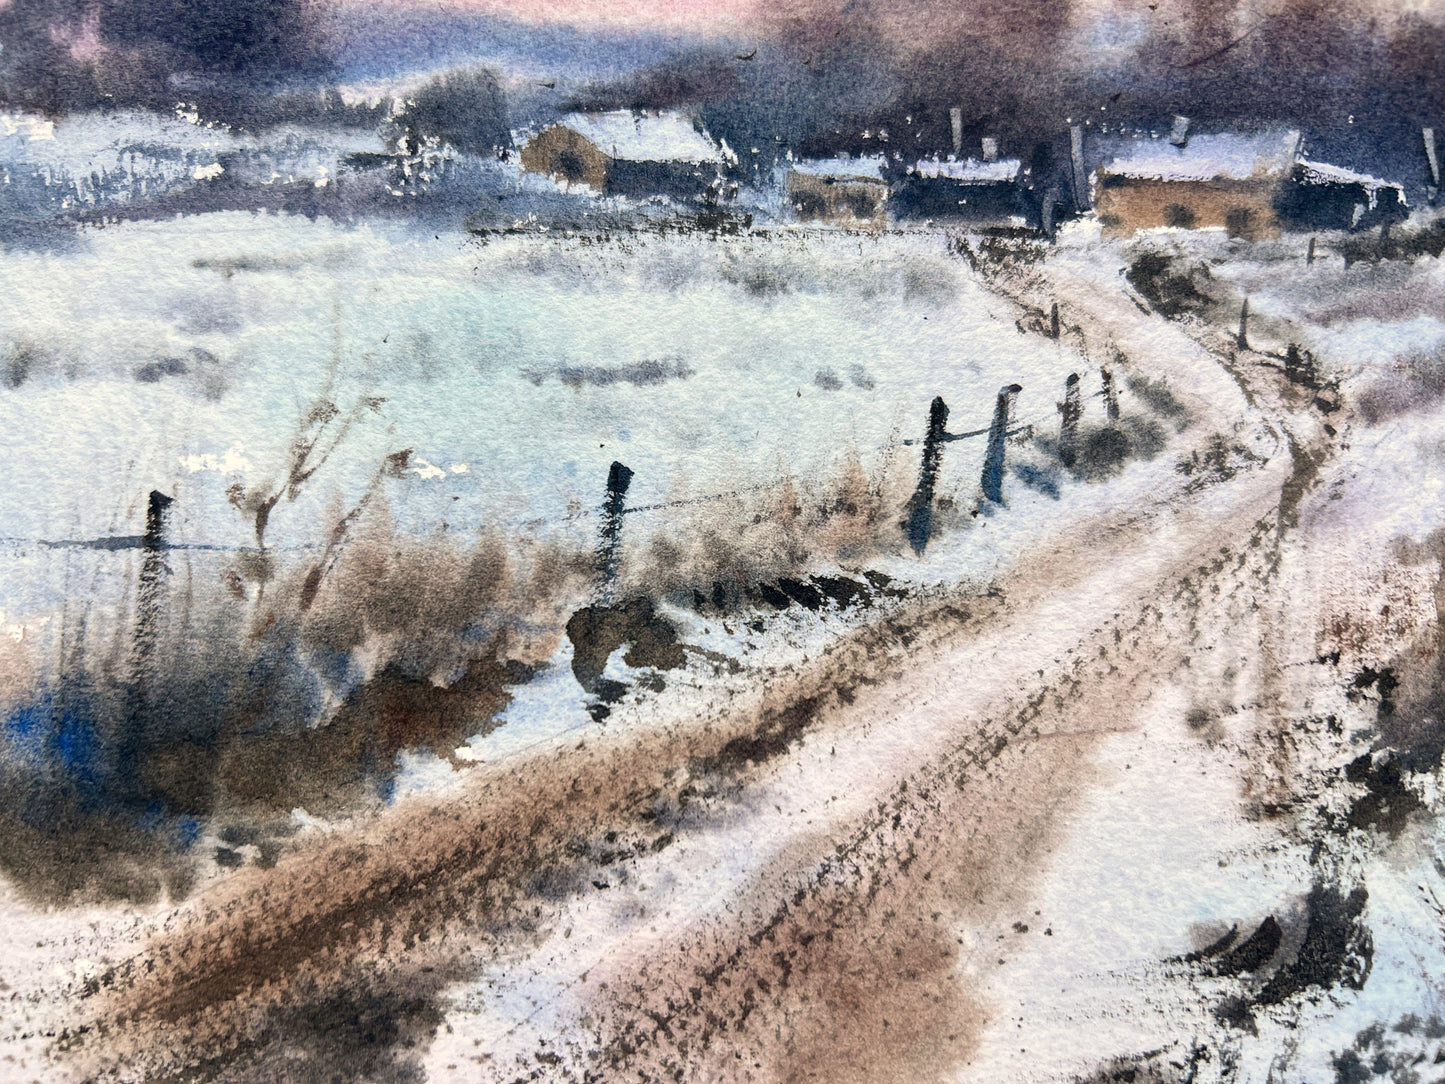 First Snow Watercolor Painting Original, Winter Landscape, Snowy Field Wall Decor, Rural Art, Sunny Evening, Gift